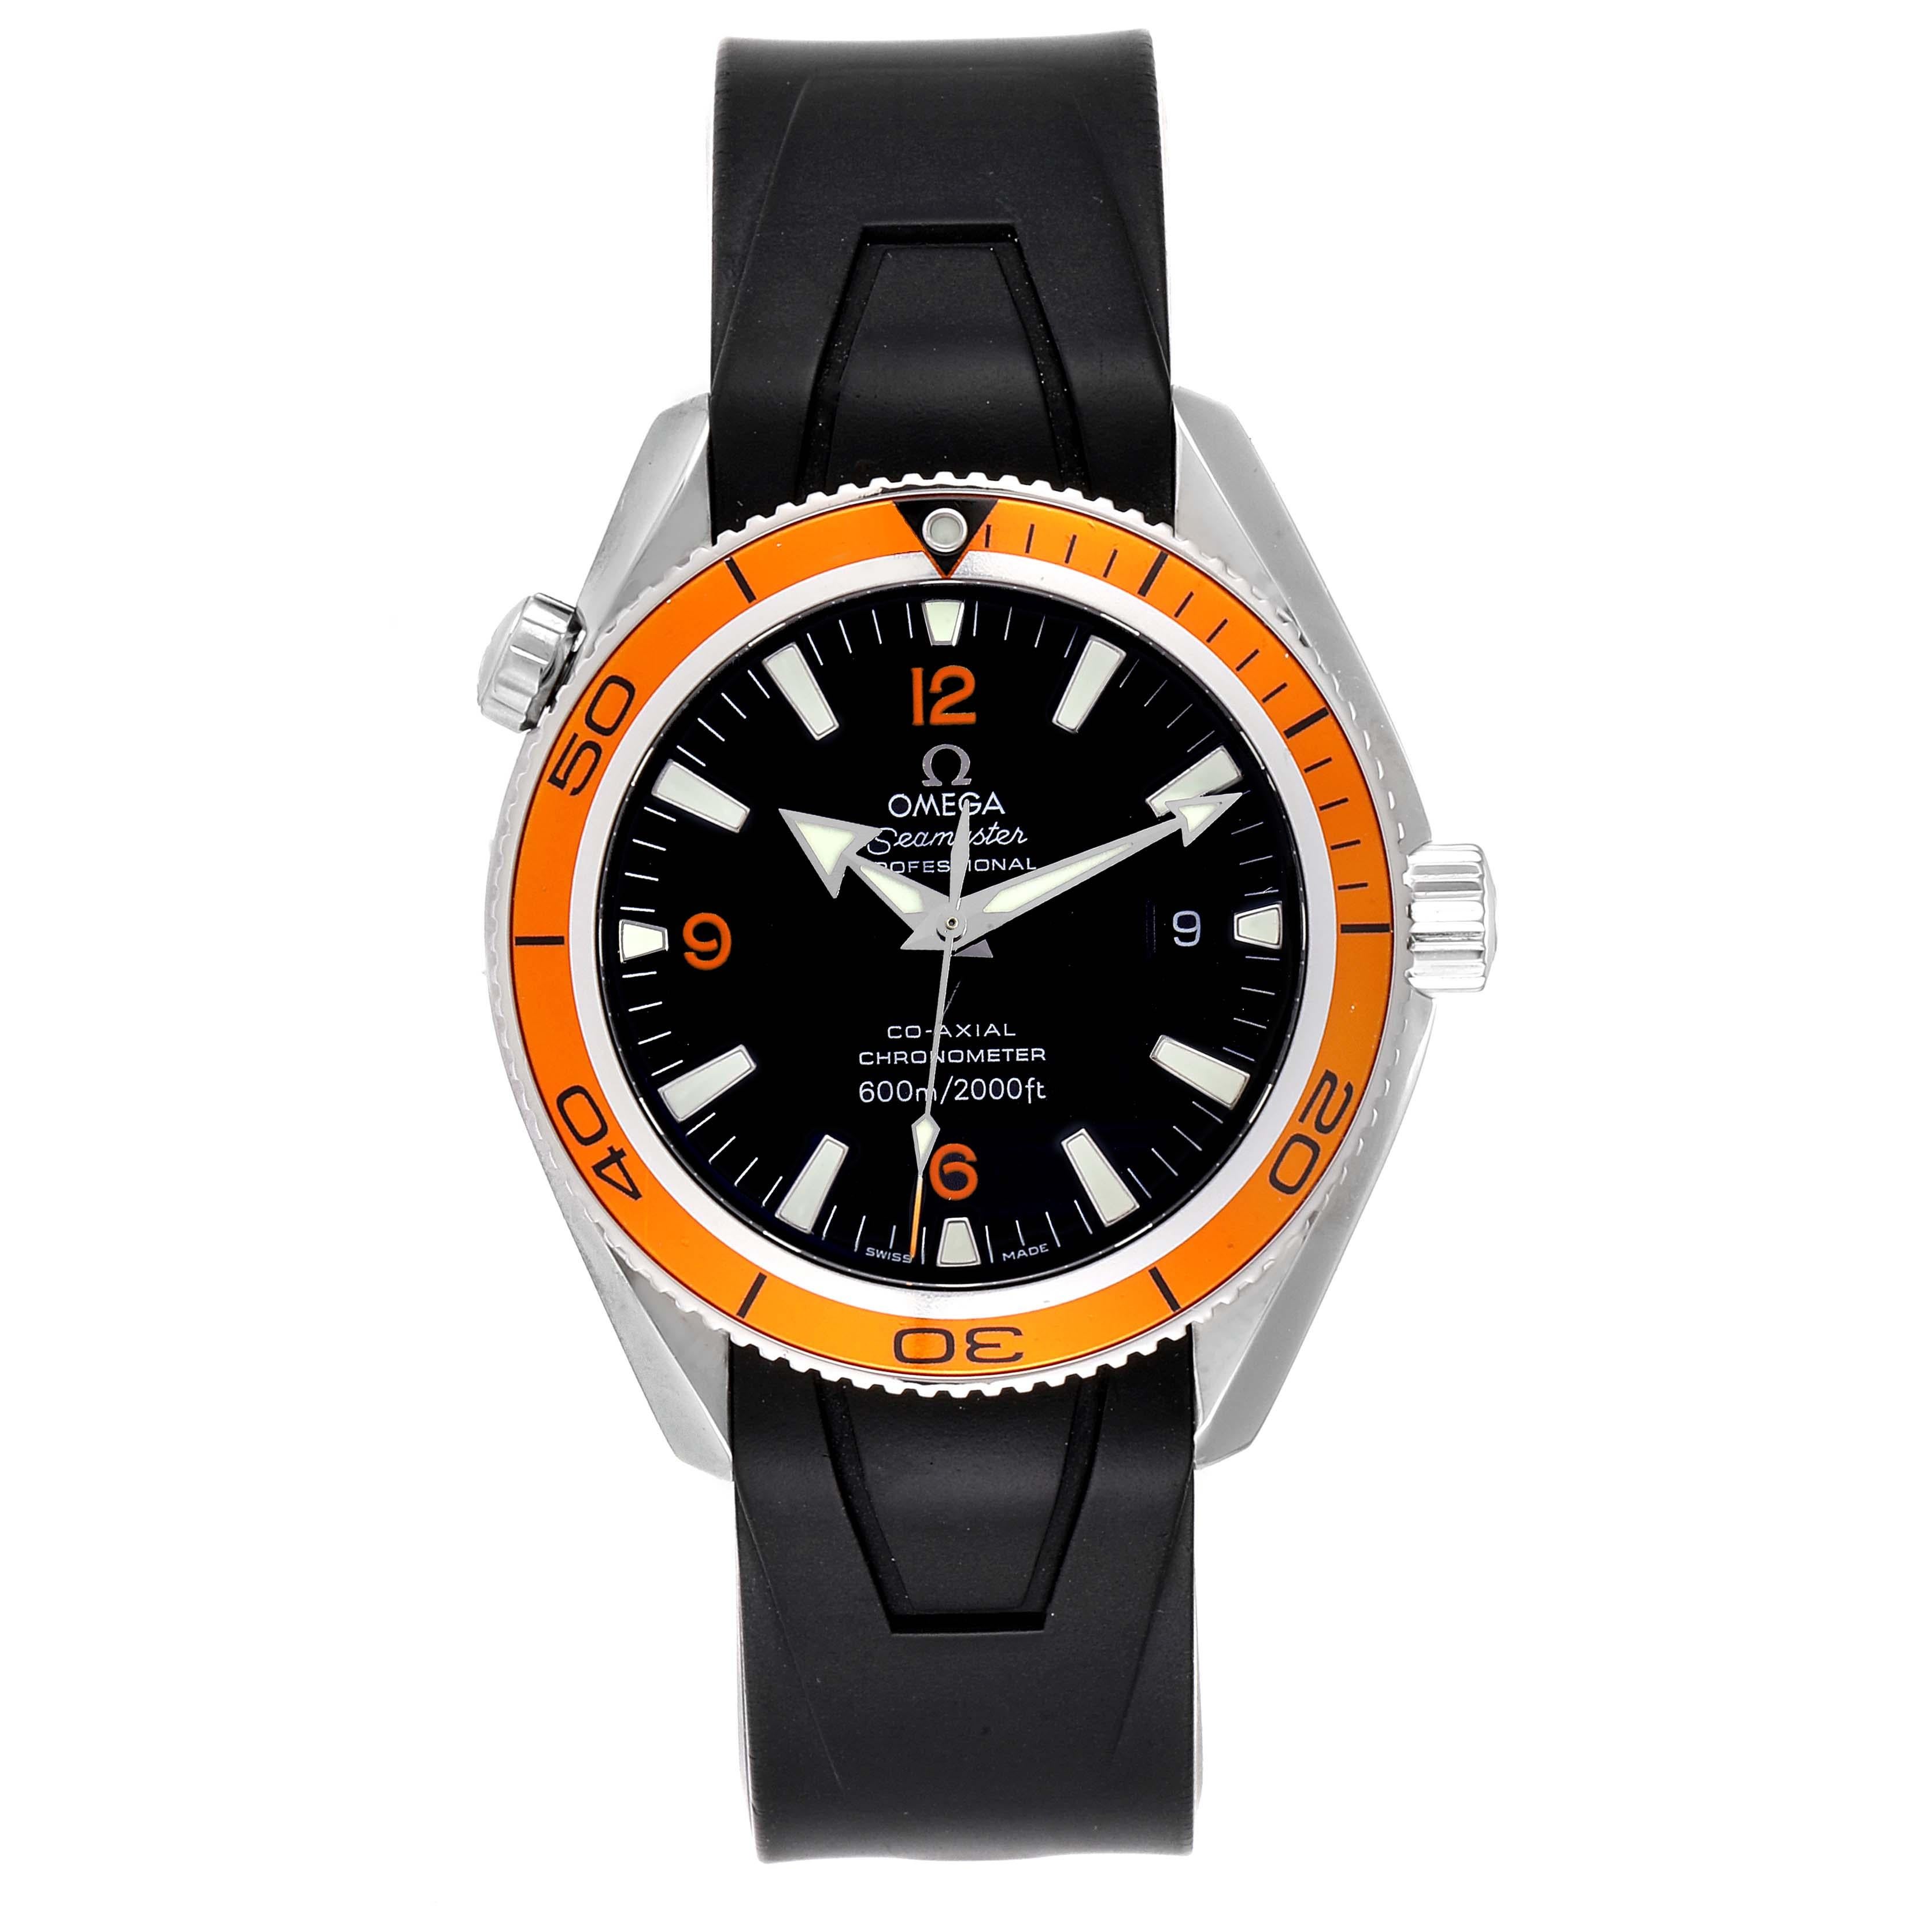 Omega Seamaster Planet Ocean Rubber Strap Mens Watch 2909.50.91 Box Card. Automatic self-winding chronograph movement. Stainless steel round case 42.0 mm in diameter. Orange uni-directional rotating bezel. Scratch resistant sapphire crystal. Black